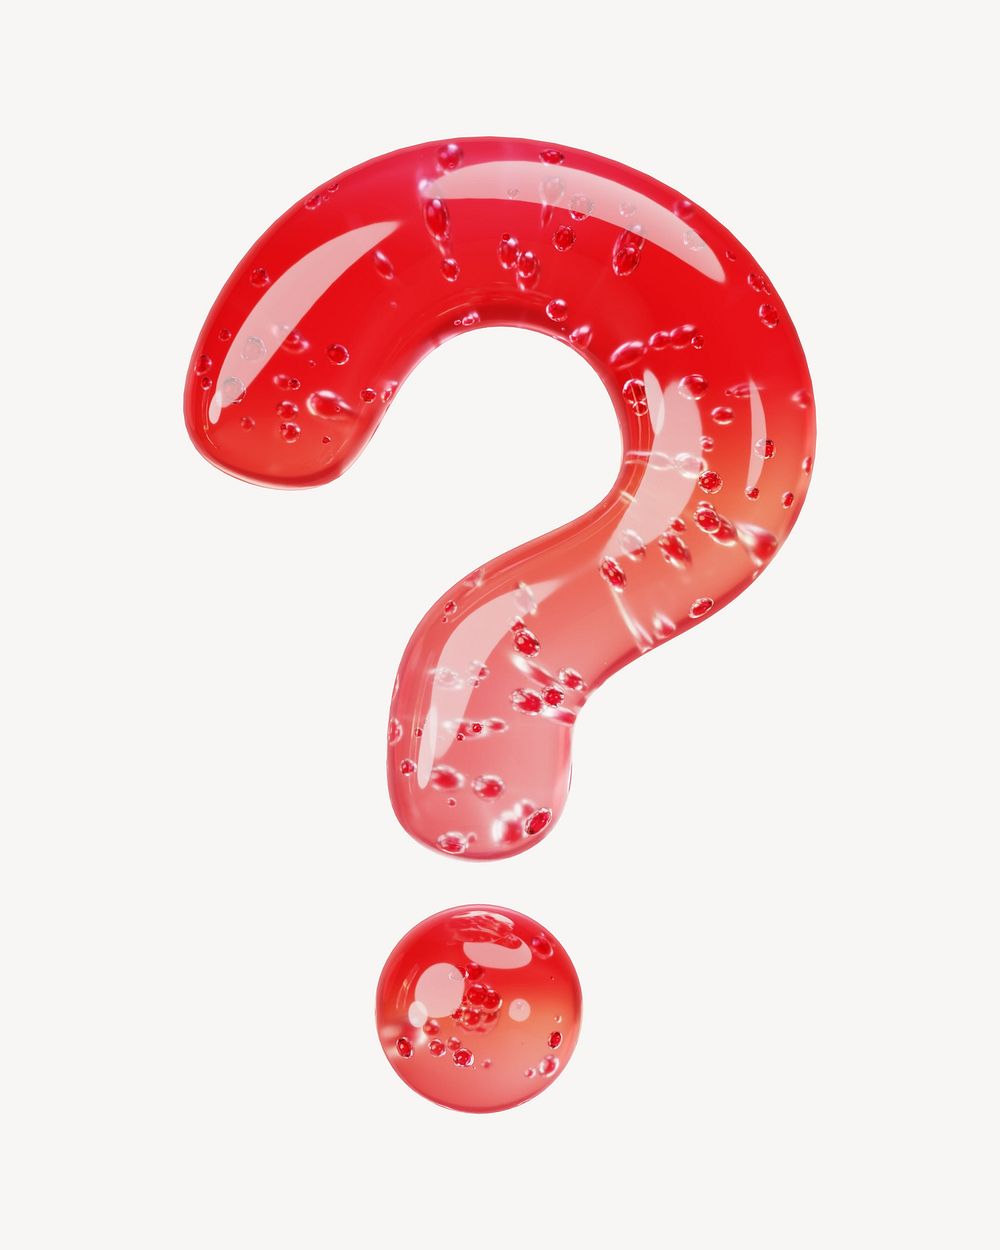 Question mark sign, 3D red jelly symbol illustration